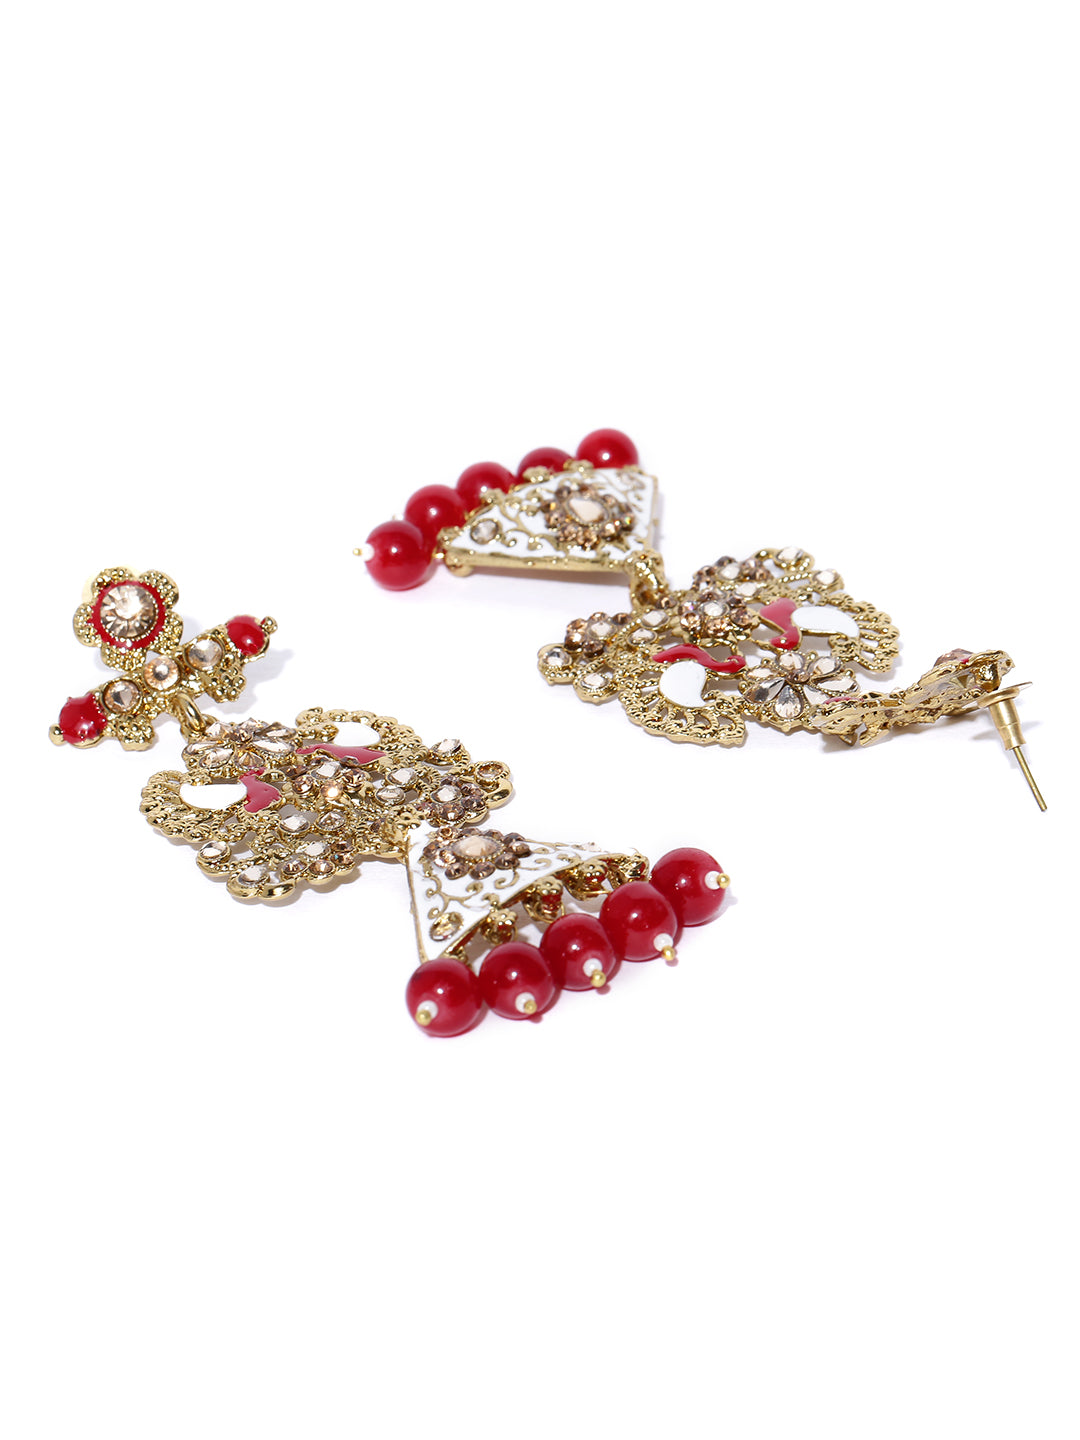 Gold-Plated Stones Studded Peacock Inspired Meenakari Drop Earrings with Red Beads Drop